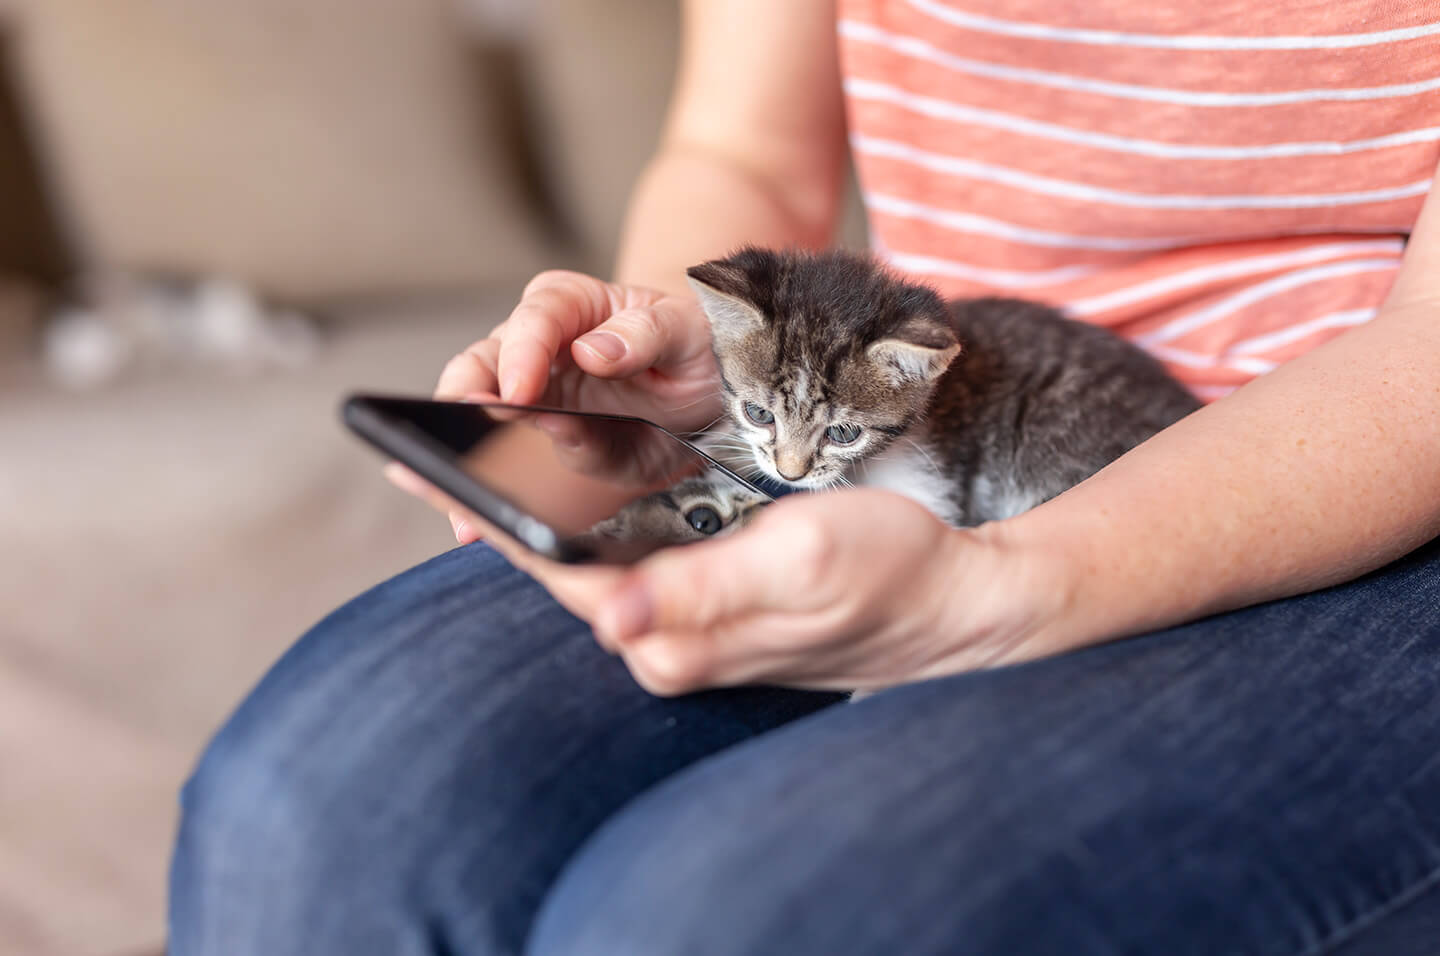 Kitten sitting on owner's lap while they are using their mobile phone. Credit: Vladans